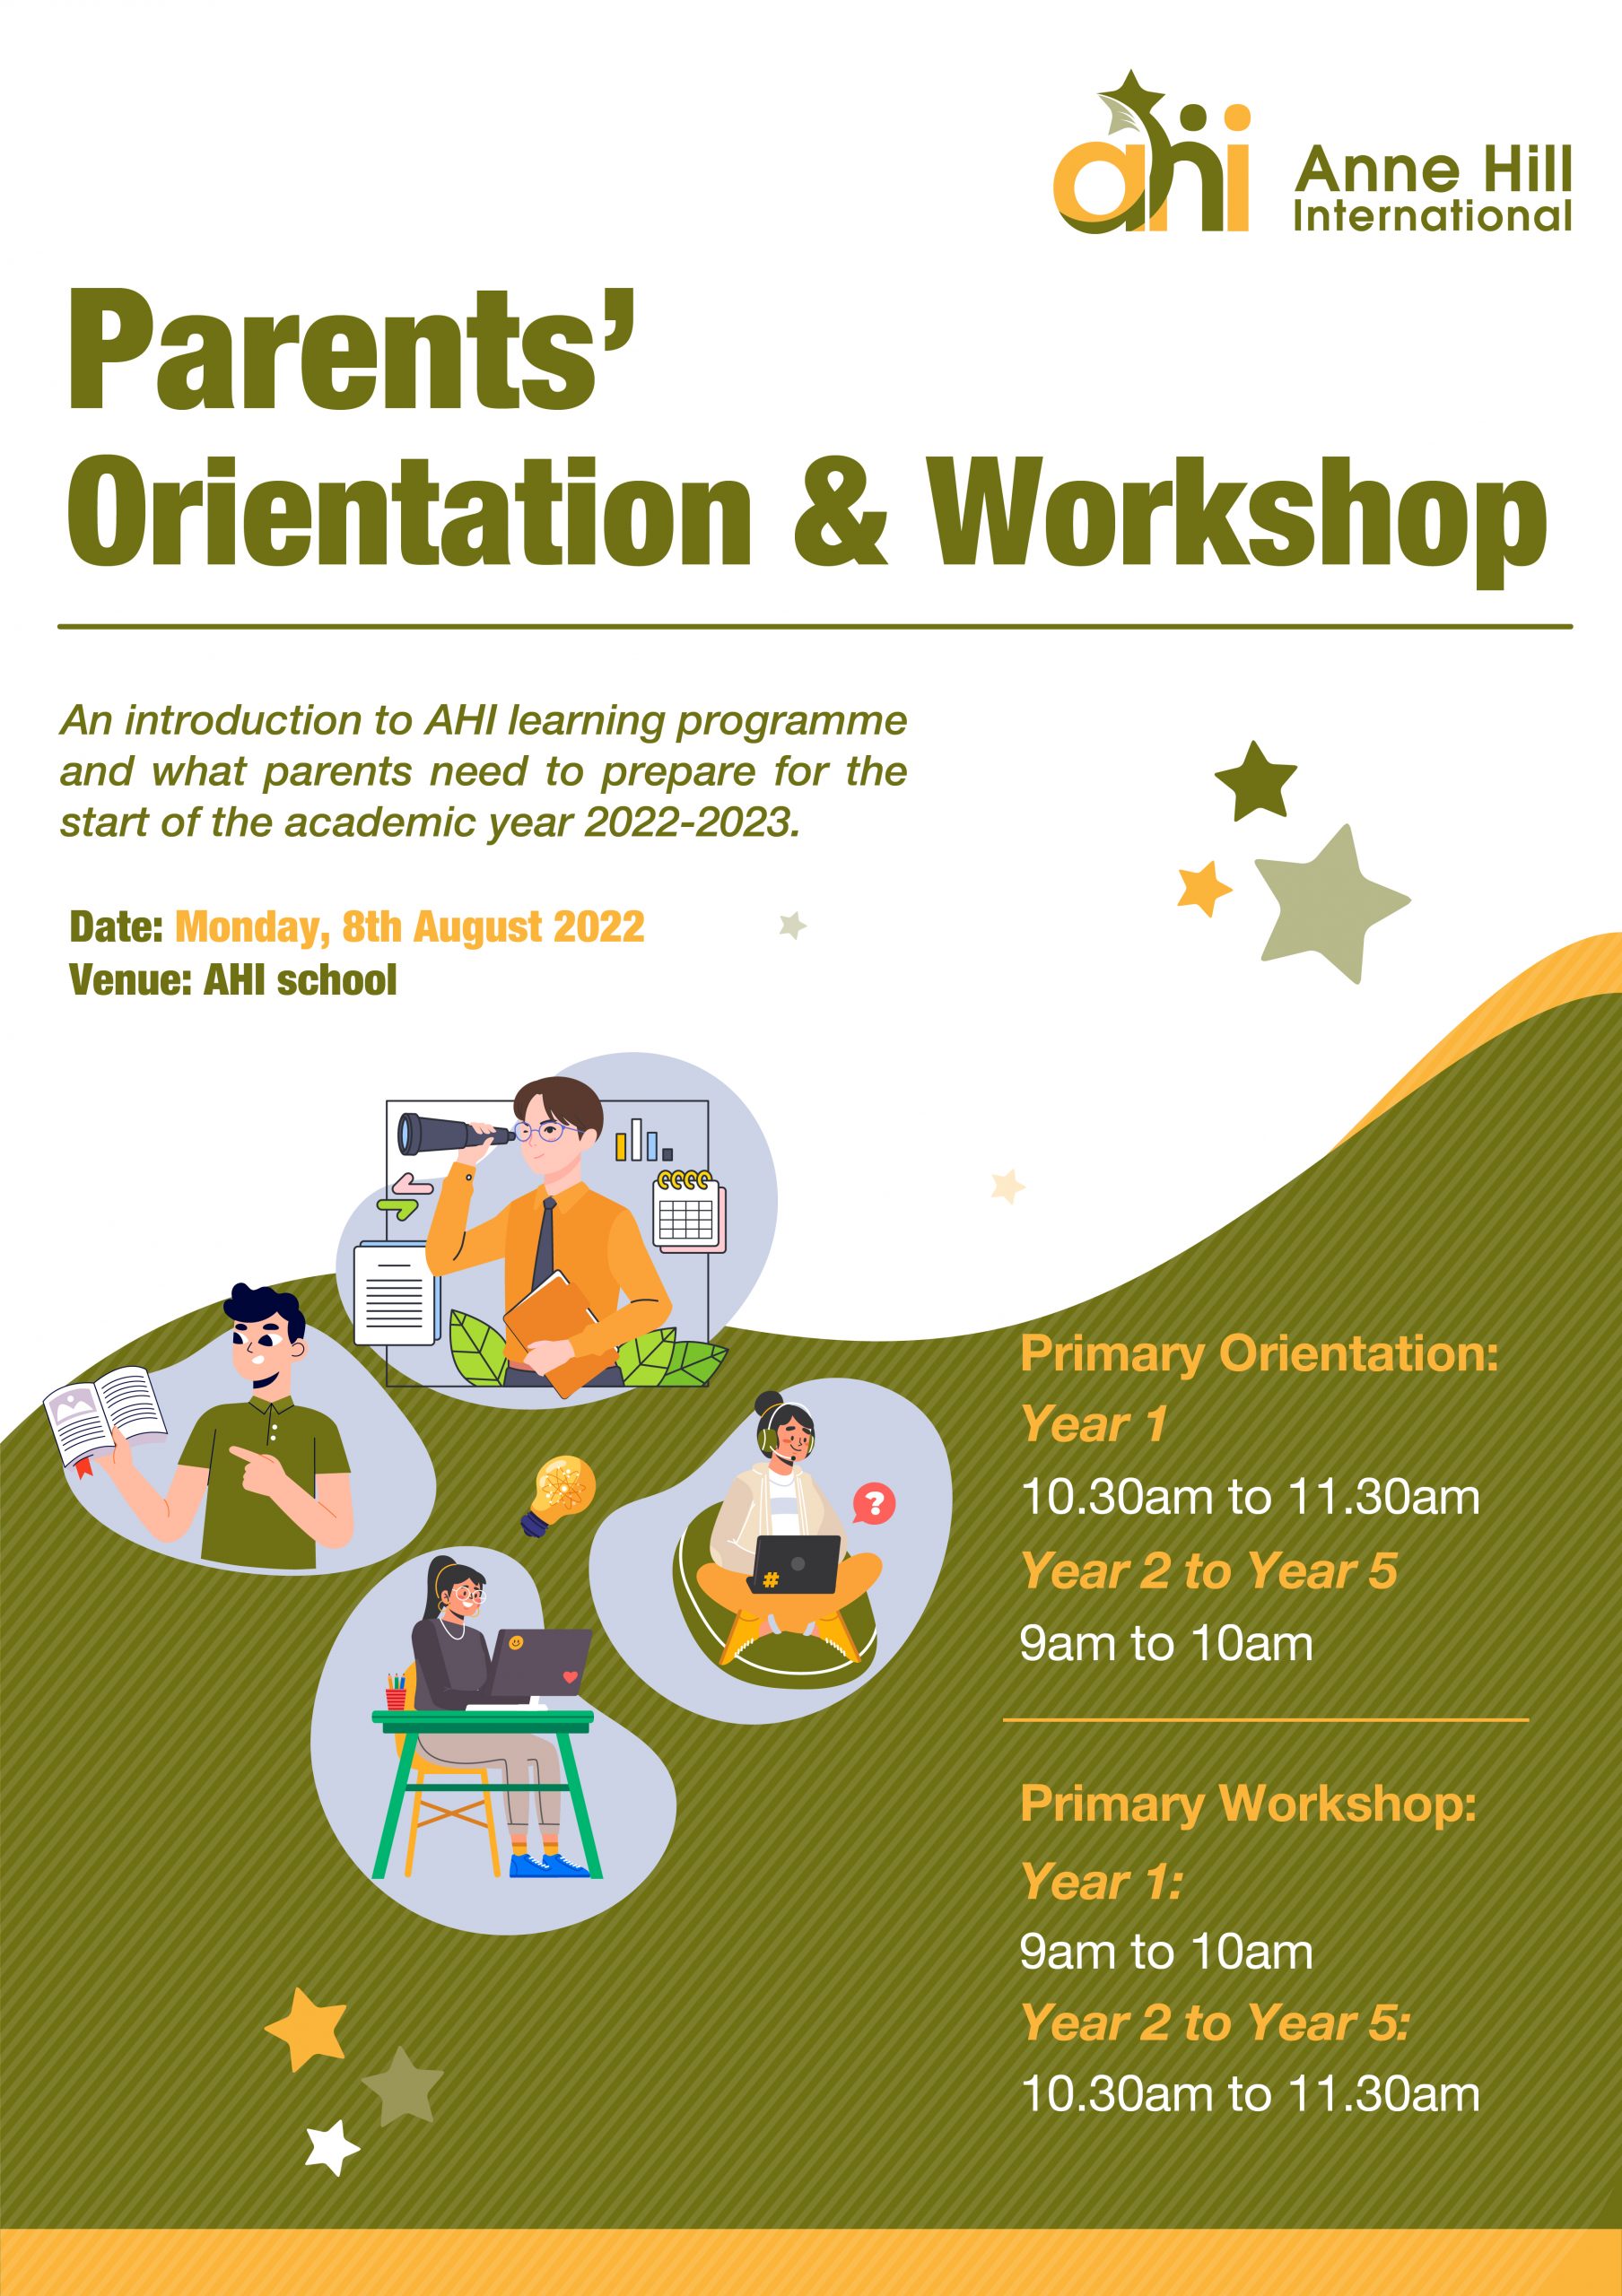 [PRIMARY SCHOOL STUDENTS] THE ORIENTATION AND WORKSHOP ON AUGUST 8TH